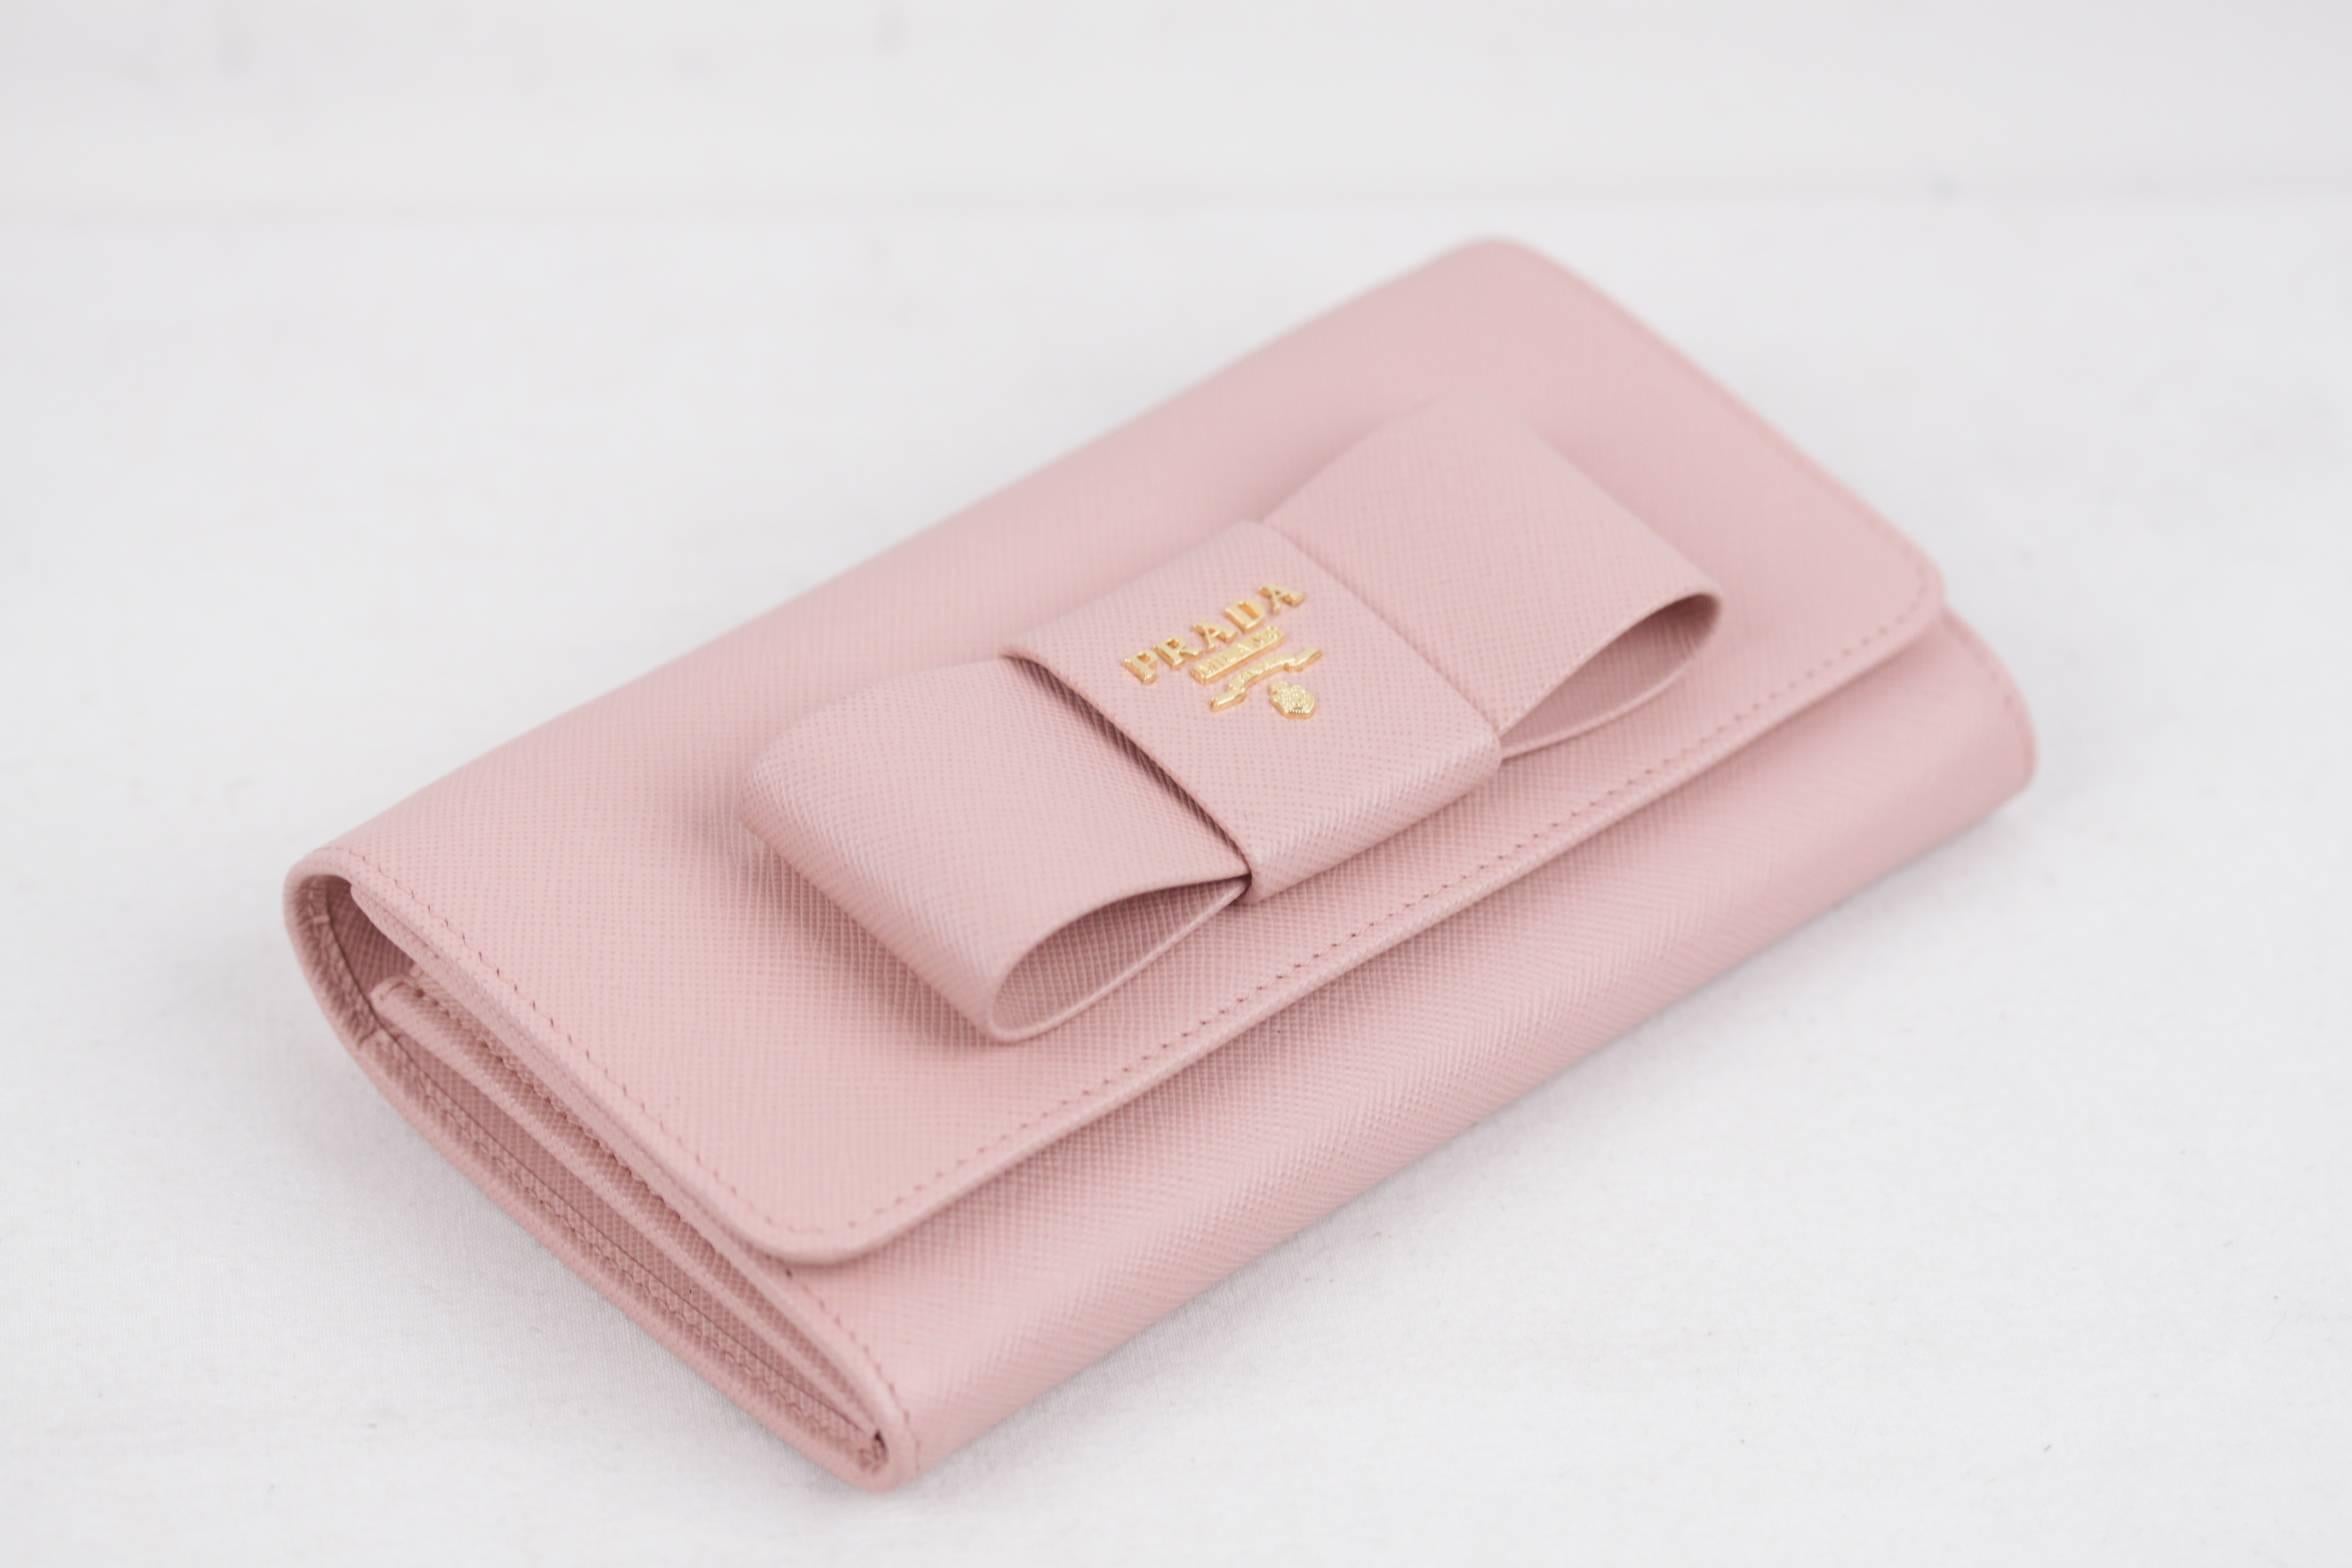 
- Saffiano leather flap wallet with leather bow on the front
- Colr. Pink (official PRADA color is ORCHIDEA)
- Art. 1M1437 - SAFFIANO FIOCCO
- Gold-plated hardware
- PRADA Metal lettering logo
- Snap closure
- 6 credit card slots
- 1 coin